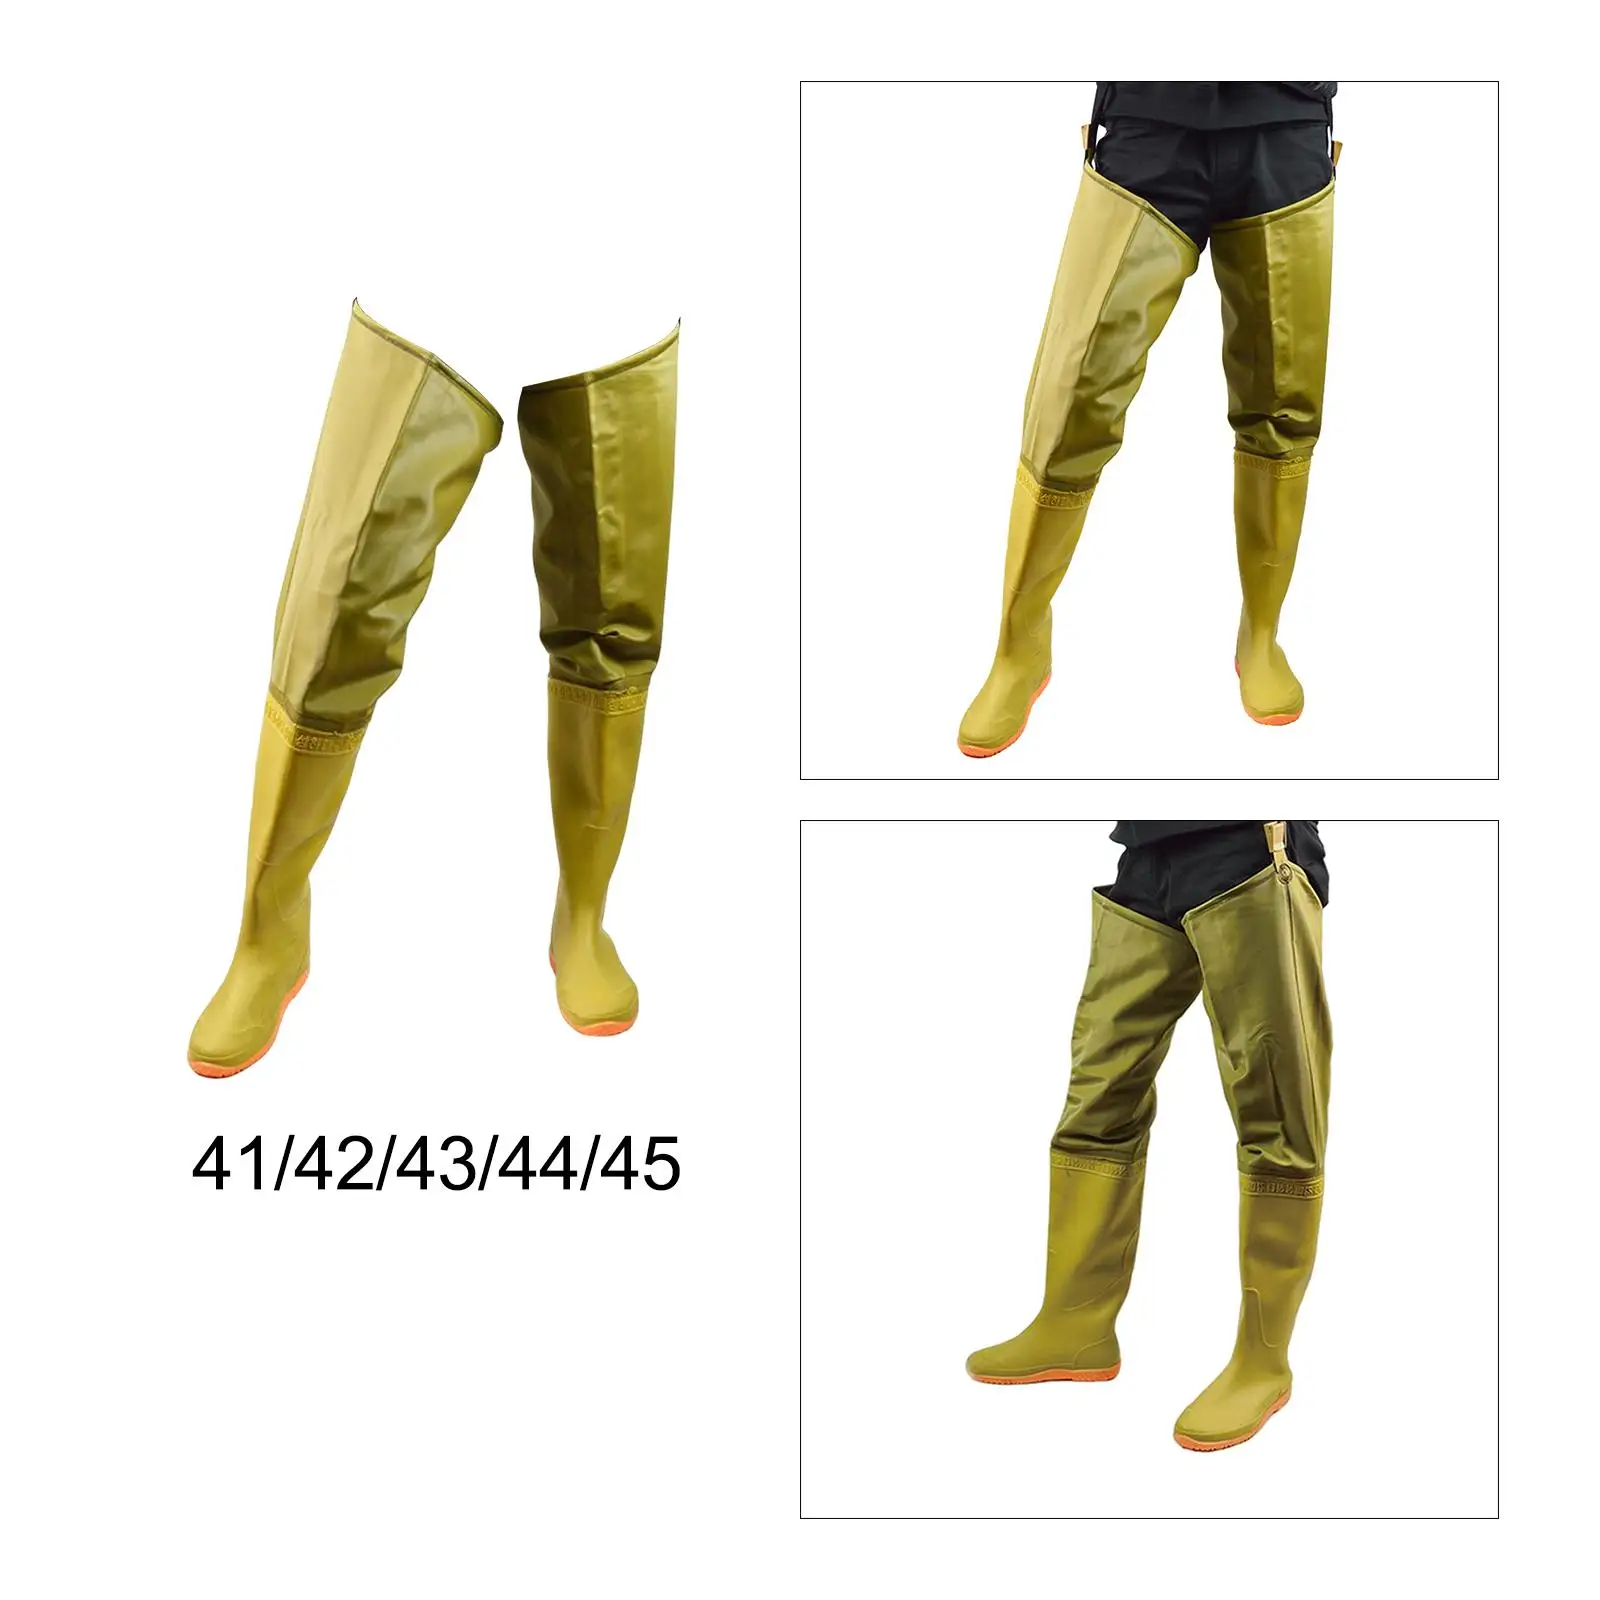 Fishing Hip Waders Waterproof Wading Hip Boots Wellies with Cleated Outsole Rain Boot Wading Trousers for Wading Agriculture